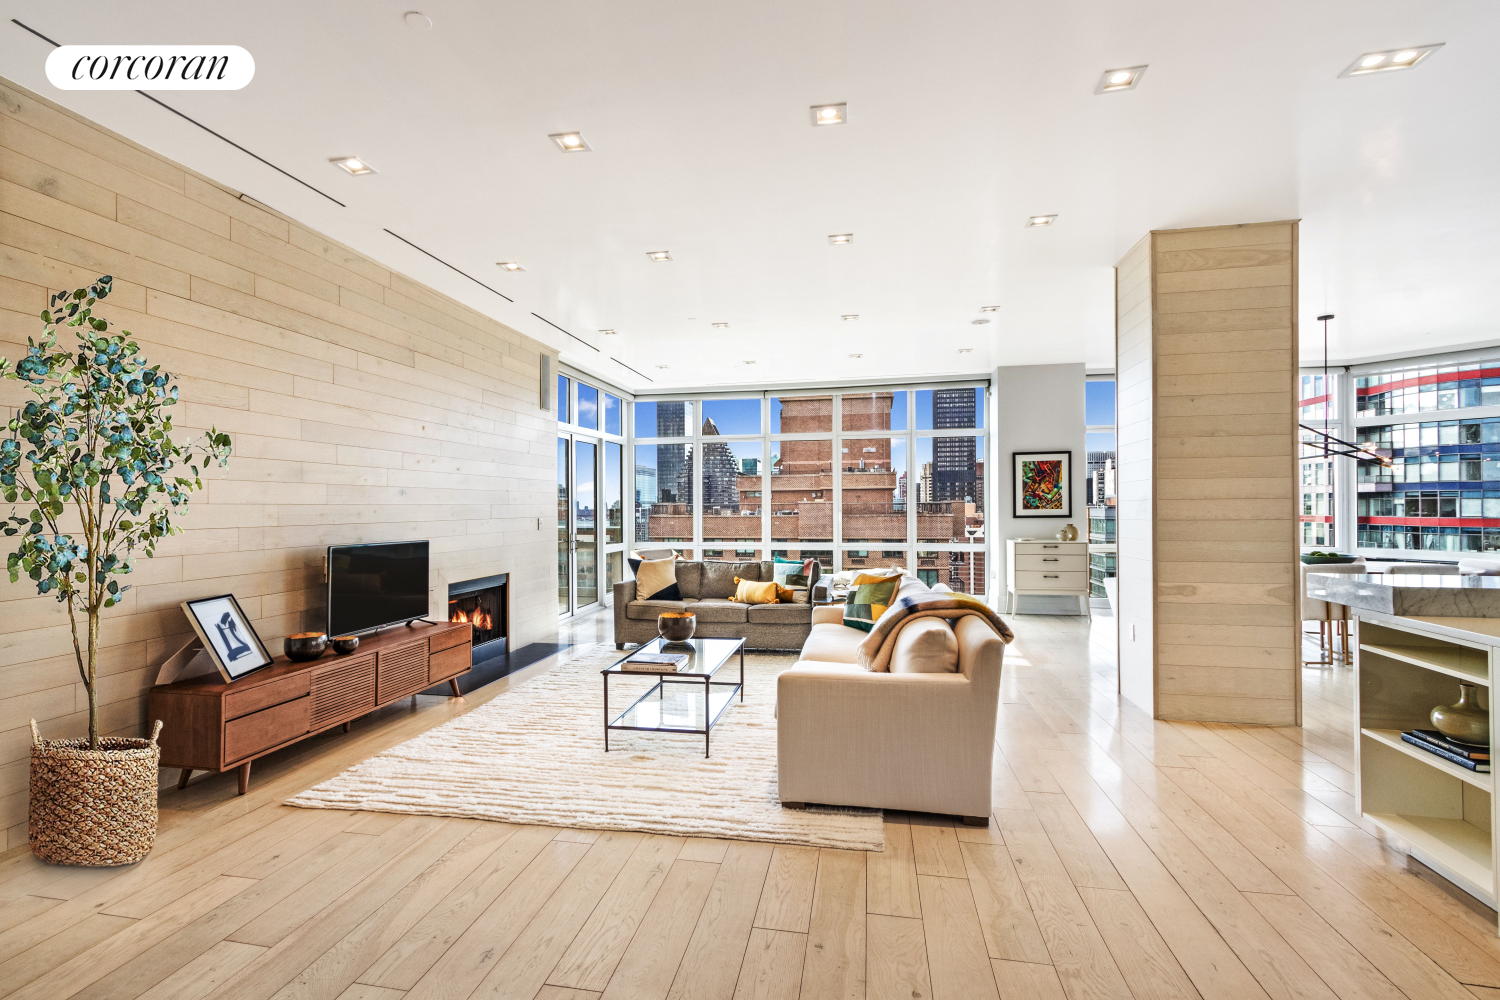 300 East 55th Street Phb, Sutton, Midtown East, NYC - 3 Bedrooms  
3.5 Bathrooms  
6 Rooms - 